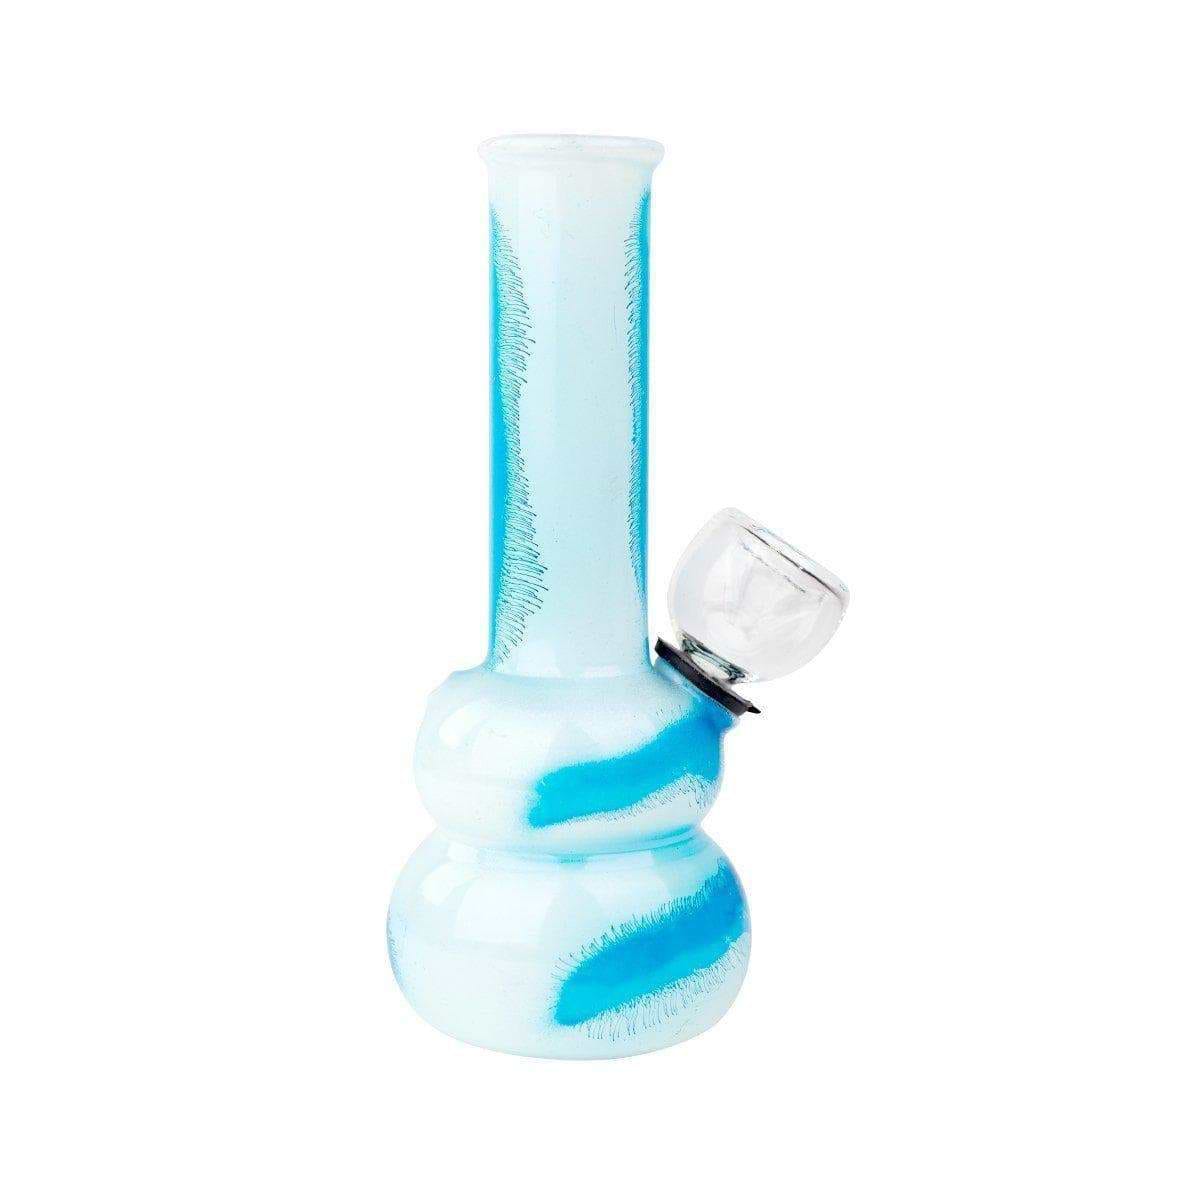 5-inch glass carbed bong smoking device swirl frosted dual-colored Eukaryote nucleus science molecule design two-layers base